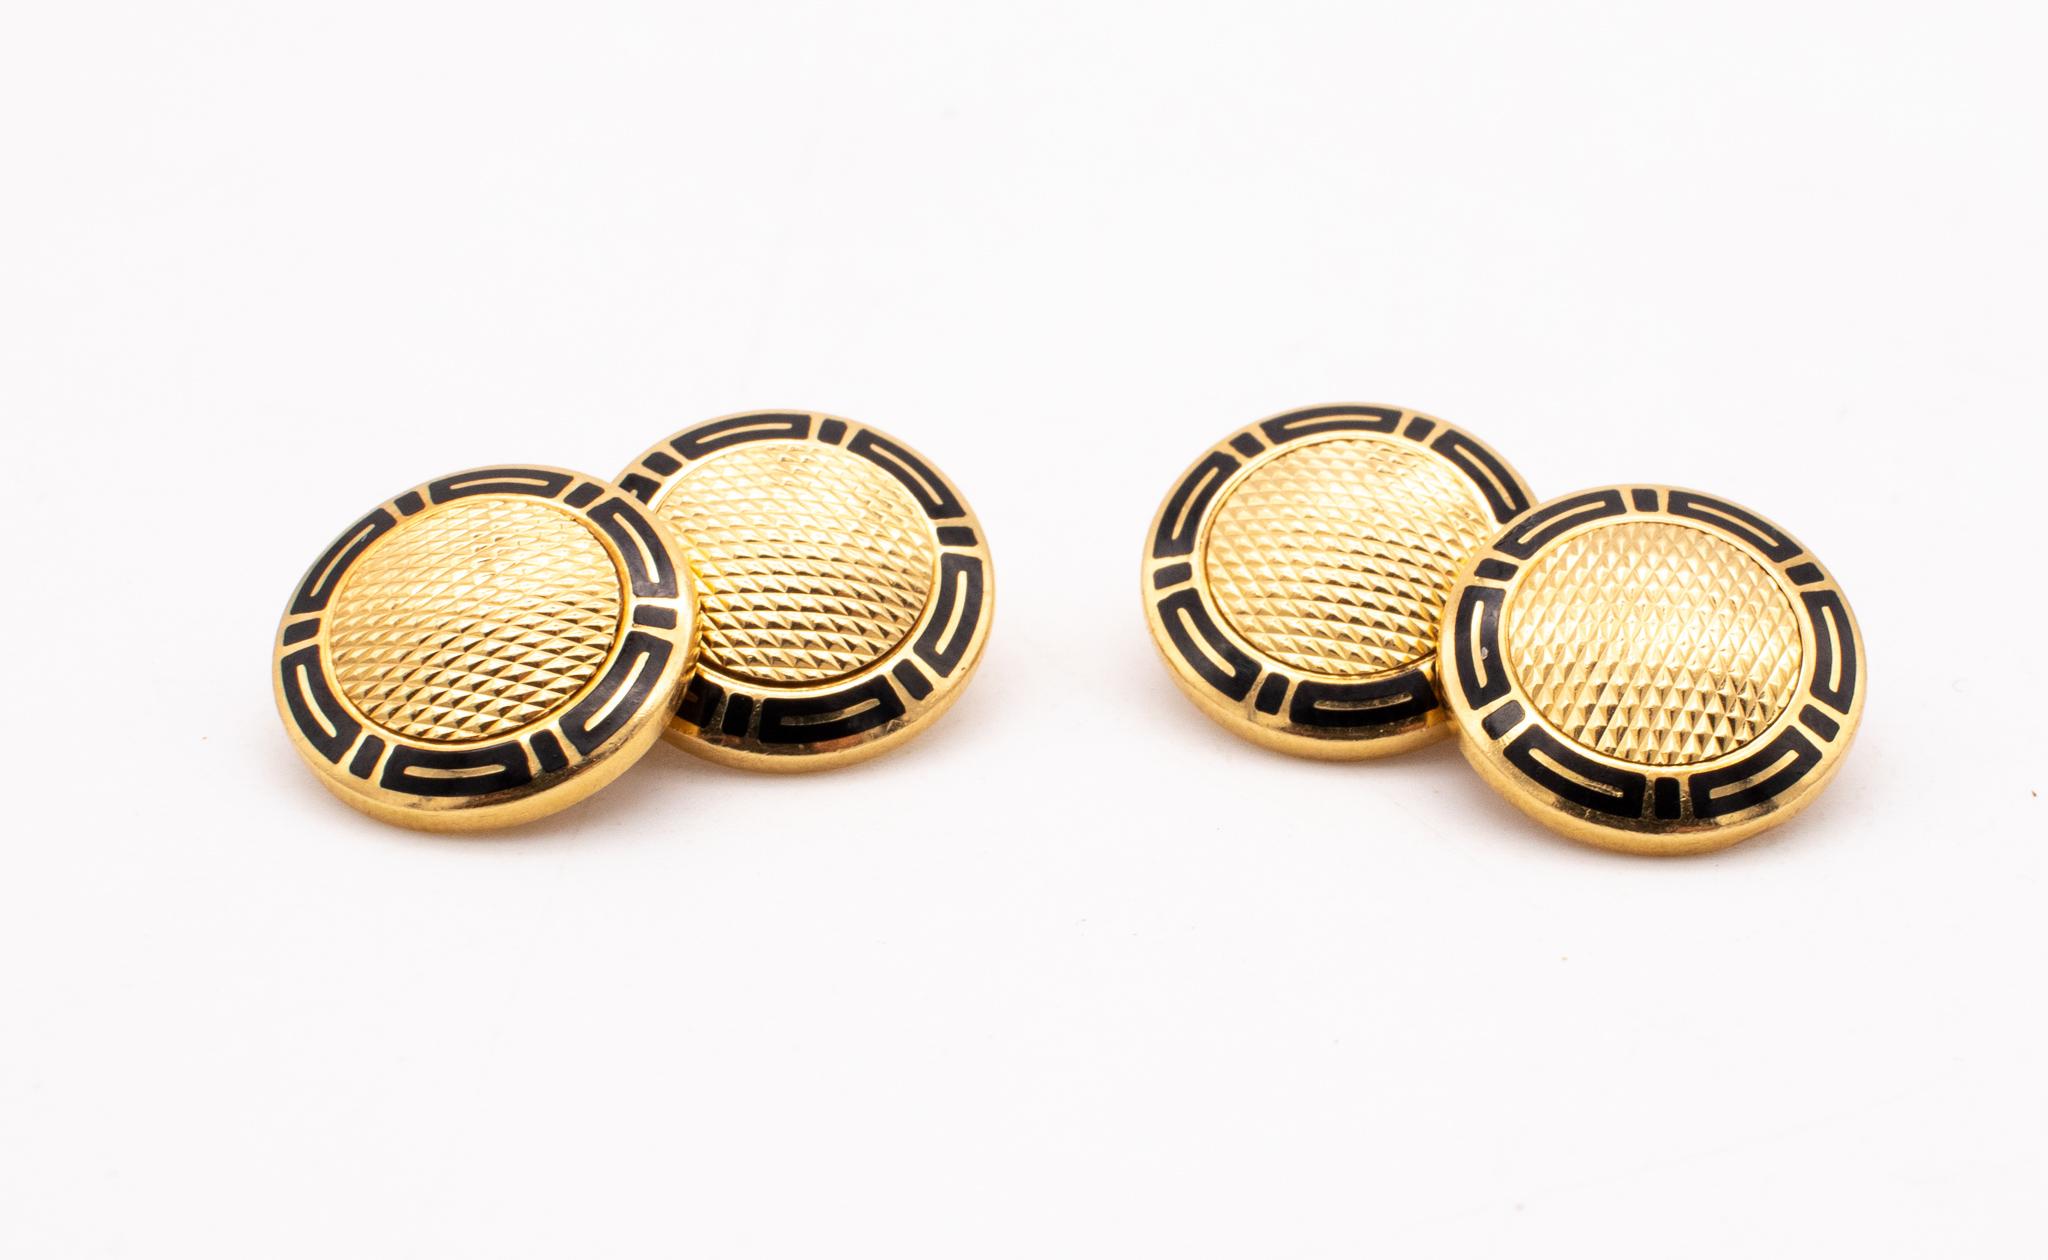 Bvlgari Roma Art-Deco Cufflinks in 18Kt Yellow Gold with Black Enamel For Sale 2